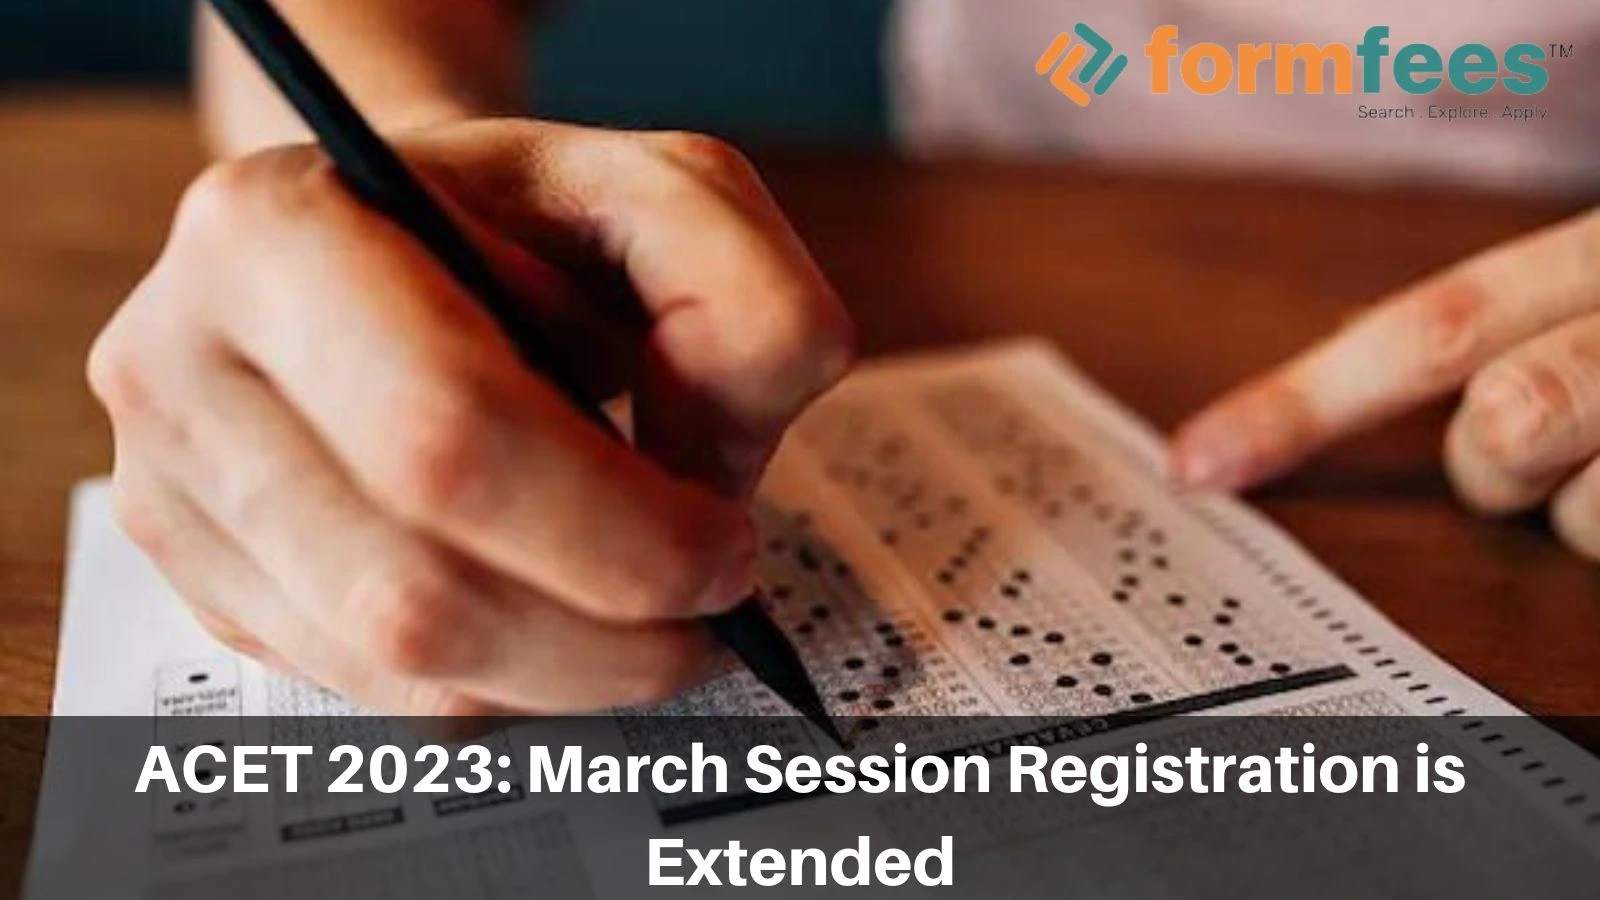 ACET 2023: March Session Registration is Extended